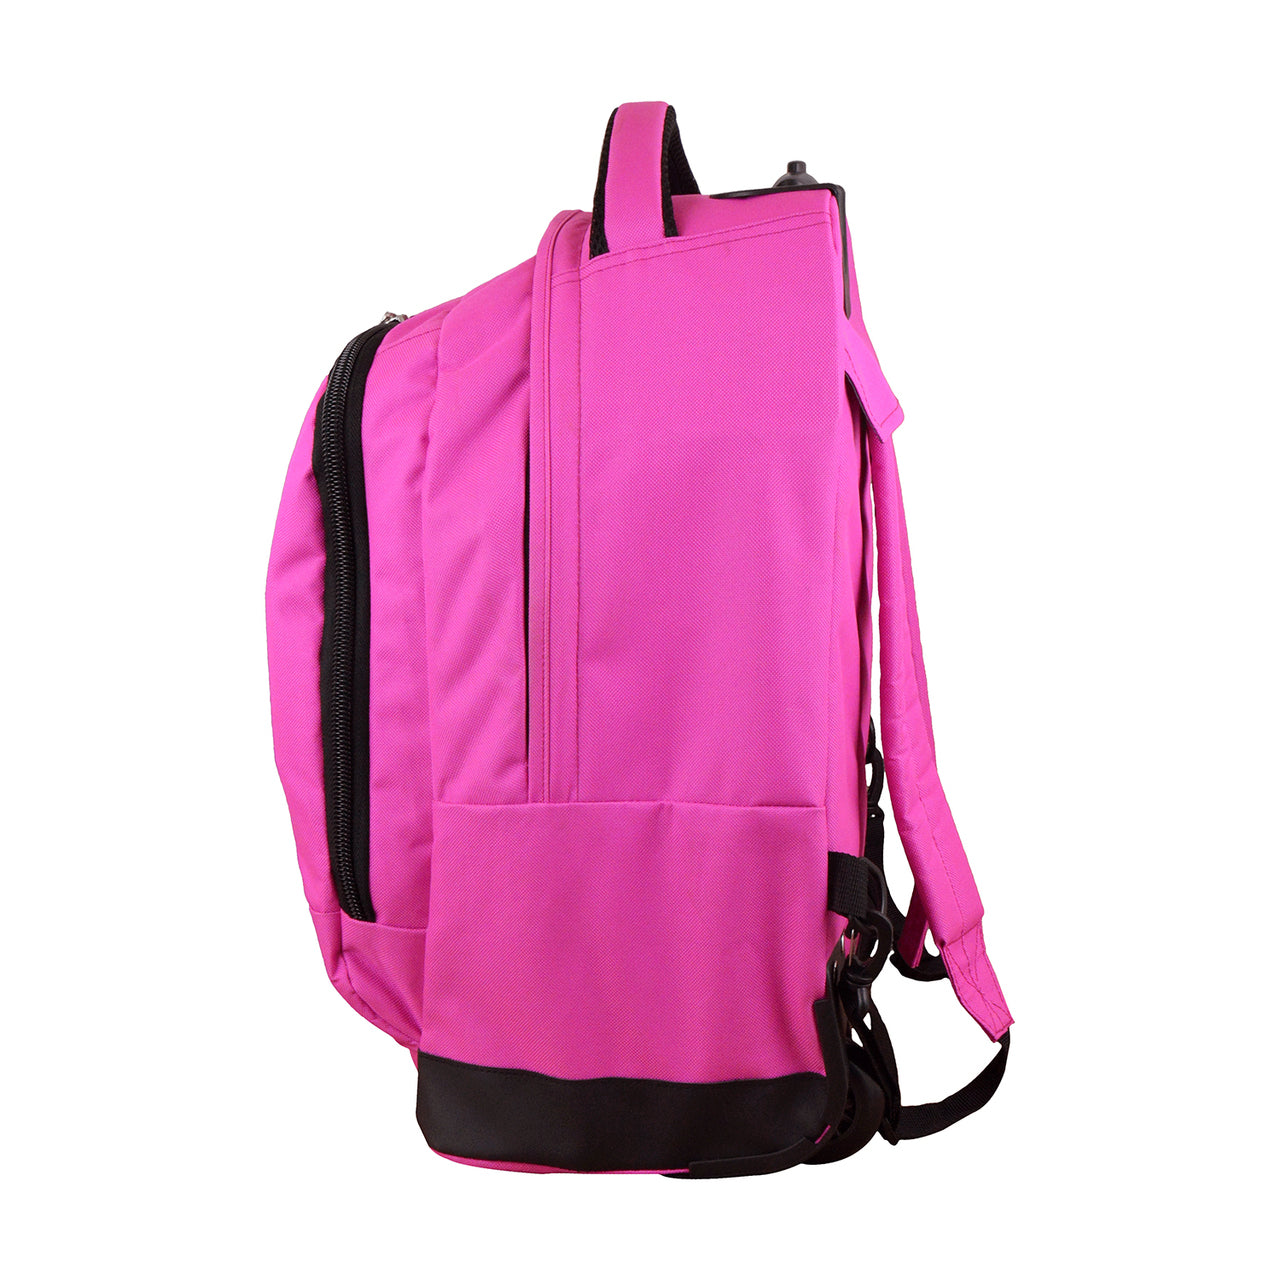 Michigan State Premium Wheeled Backpack in Pink